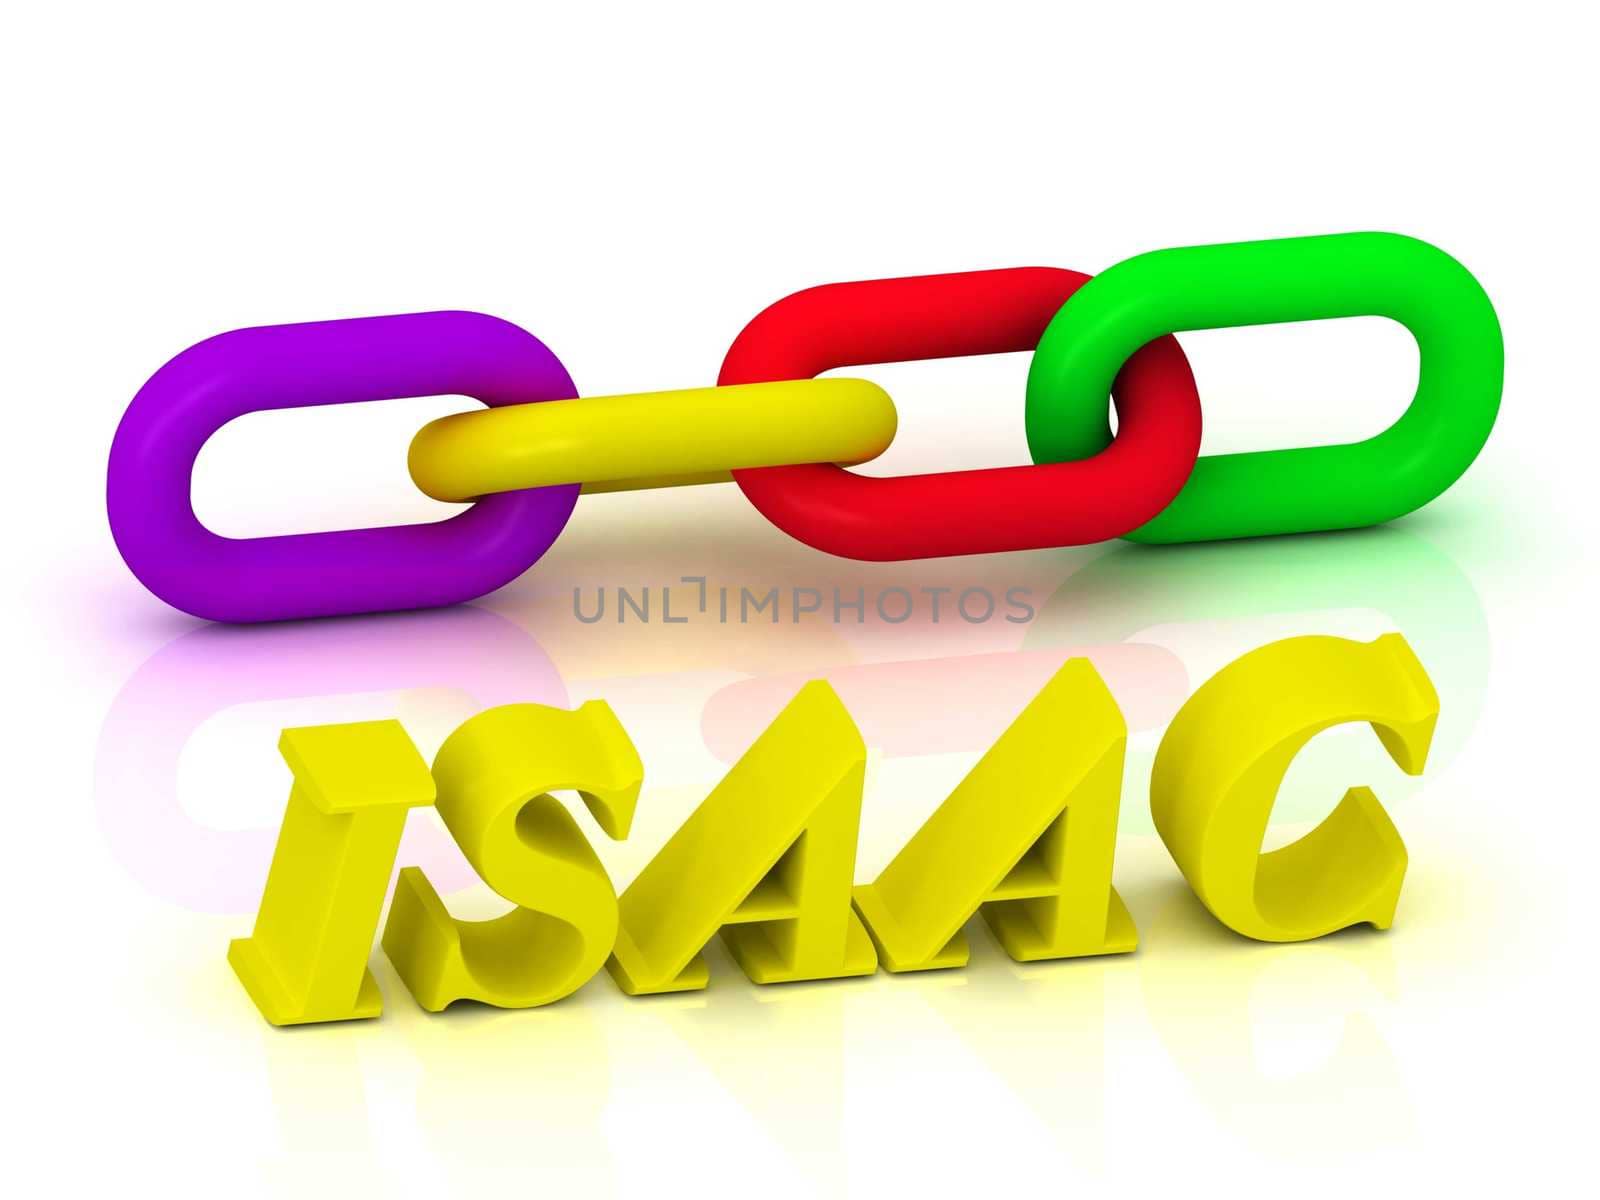 ISAAC- Name and Family of bright yellow letters and chain of green, yellow, red section on white background